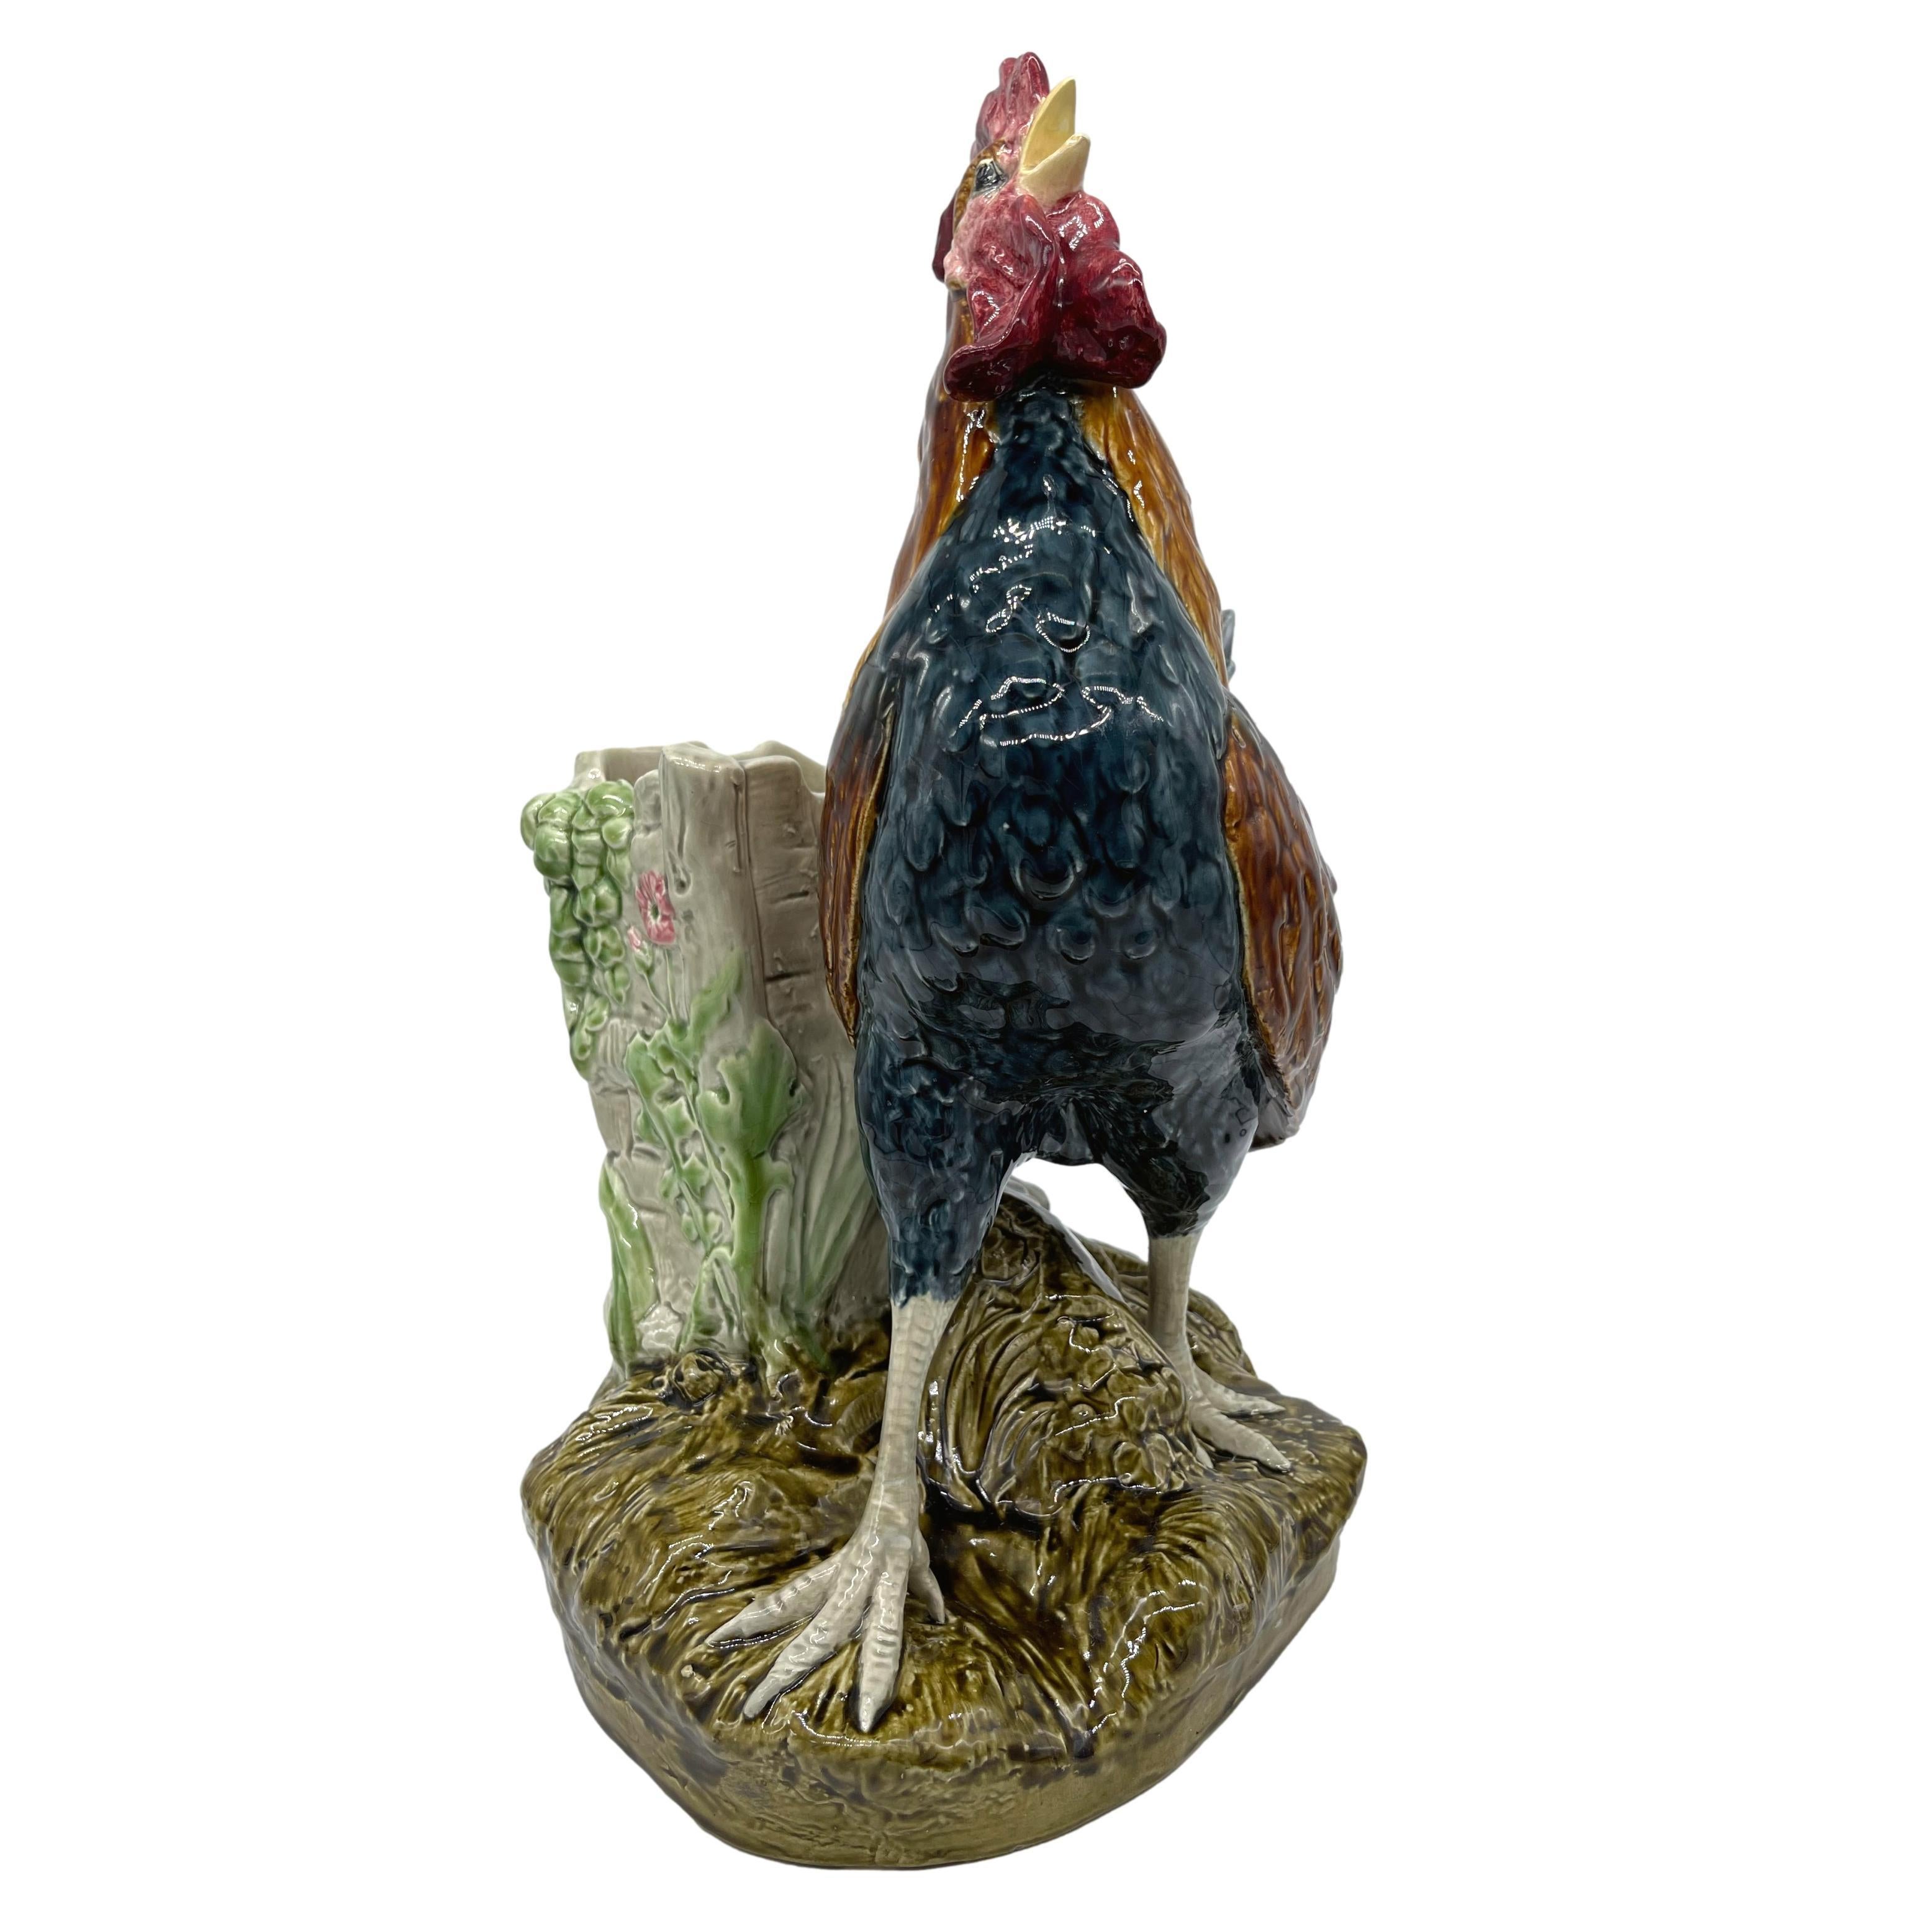 Victorian Majolica Rooster Large Spill Vase Signed Louis Carrier-Belleuse, French, ca 1890 For Sale